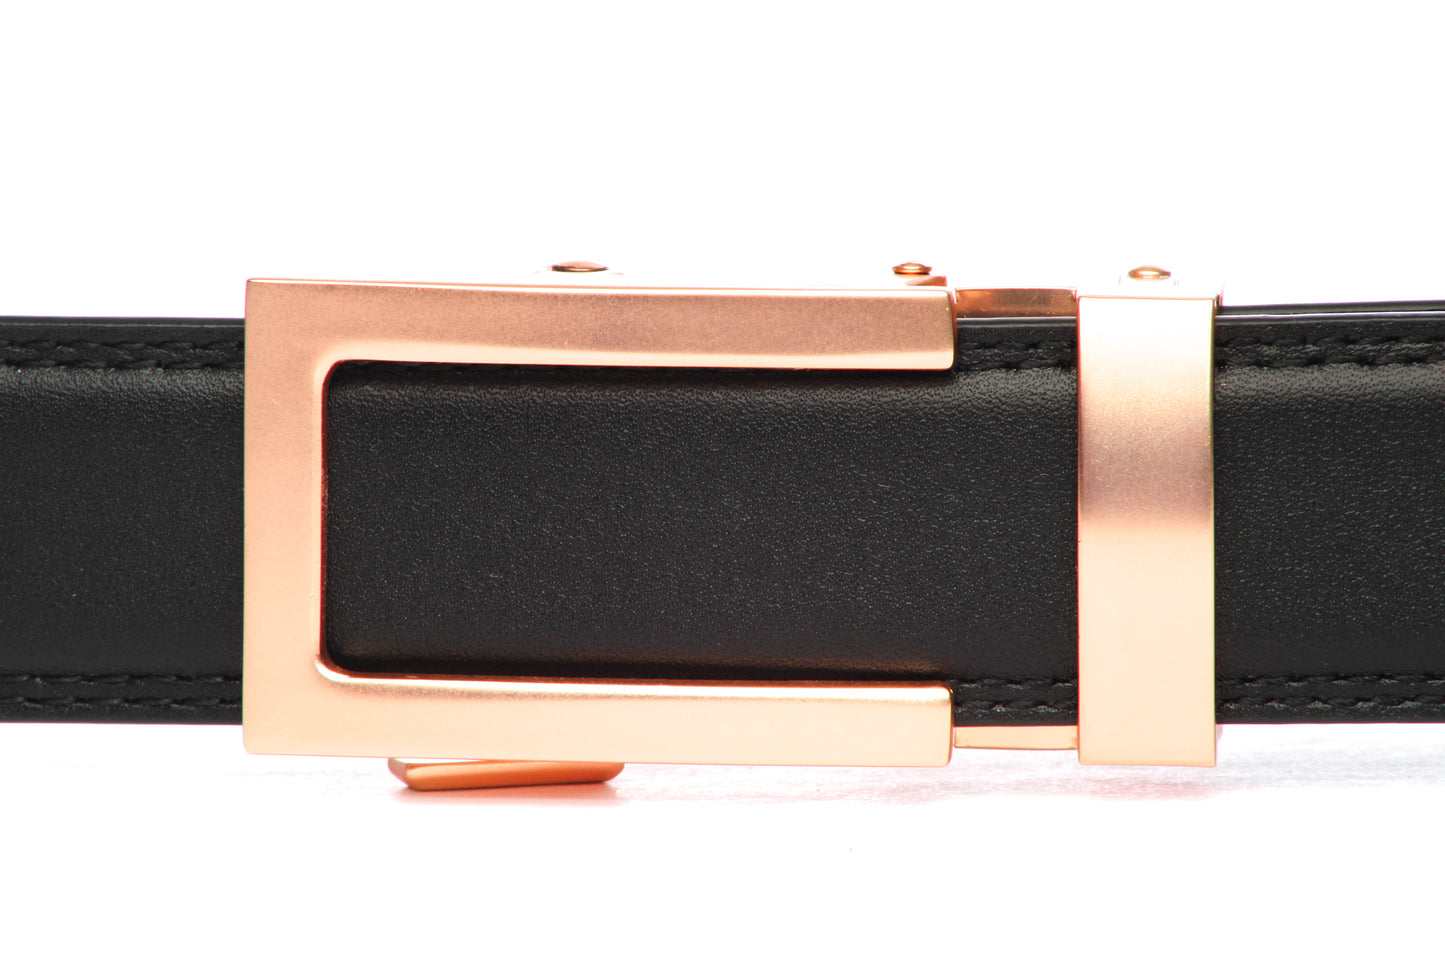 Men's traditional ratchet belt buckle in rose gold with a 1.25-inch width, front view.